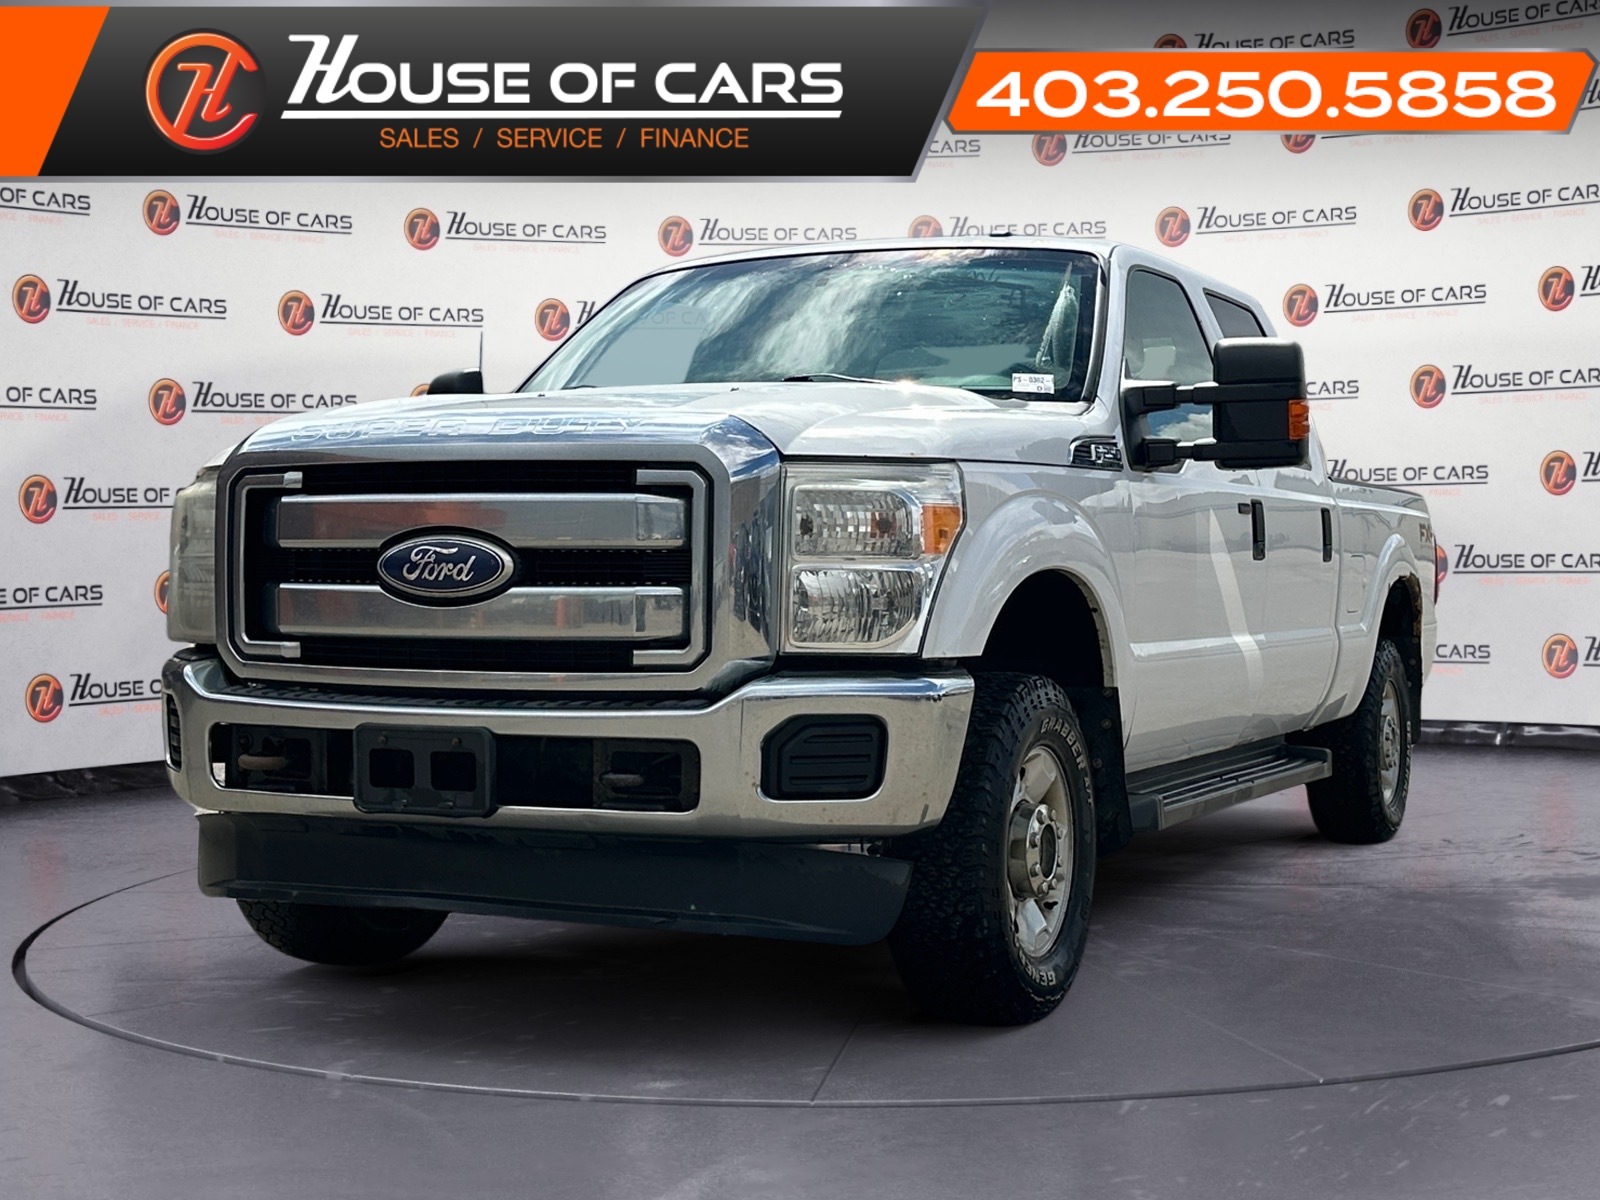 2011 Ford F-250 4WD Crew Cab 156  XLT (MECHANIC SPECIAL)